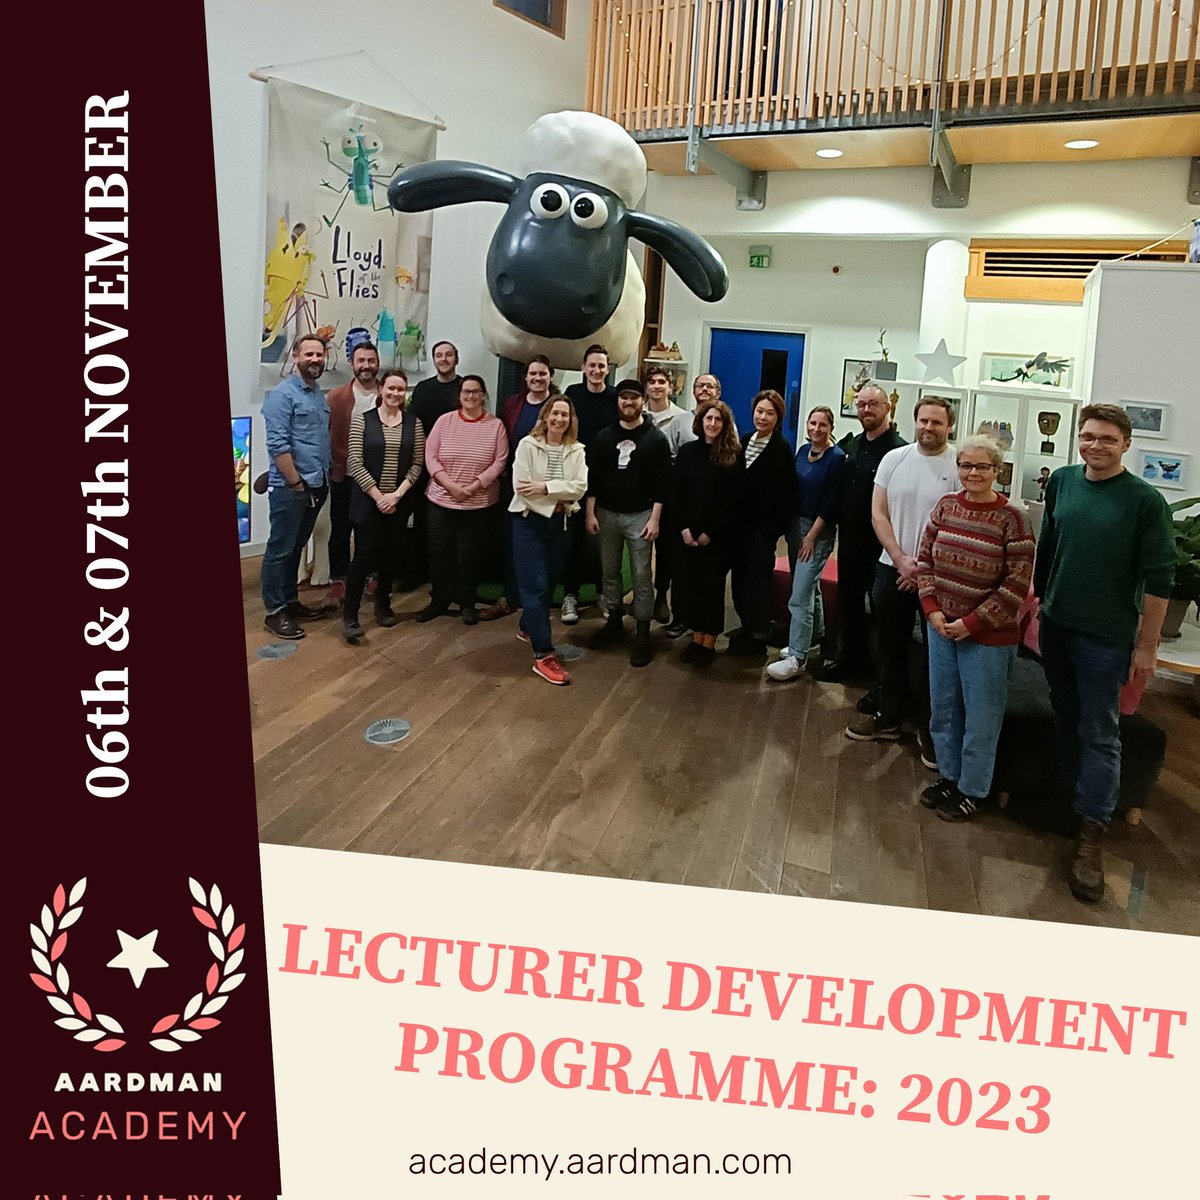 Fantastic time with this brilliant bunch who joined us for our LECTURER DEVELOPMENT PROGRAMME: 2023. Our programme included fantastic Aardman guest speakers, Q&A's & discussion sessions. Thank you to all our participants & speakers for a really inspiring couple of days! @aardman